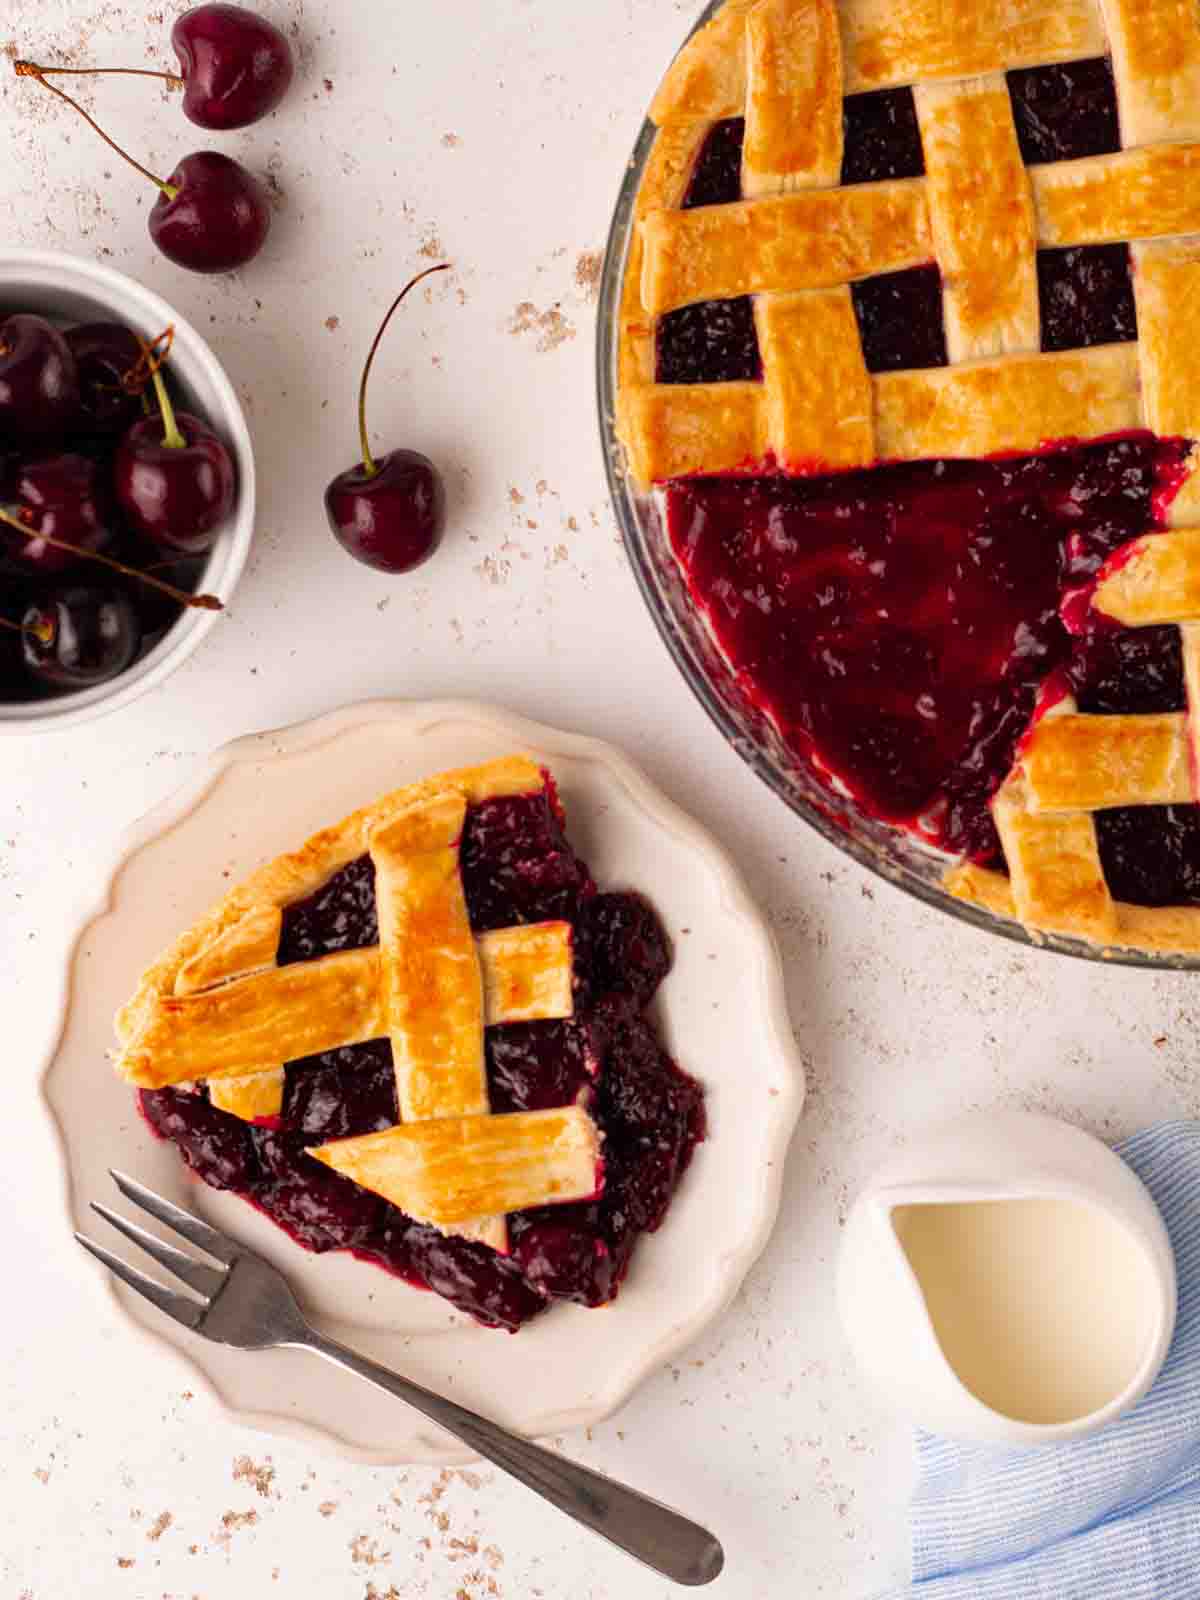 A homemade cherry pie with a lattice topping, with a portion on a plate, ready to eat.